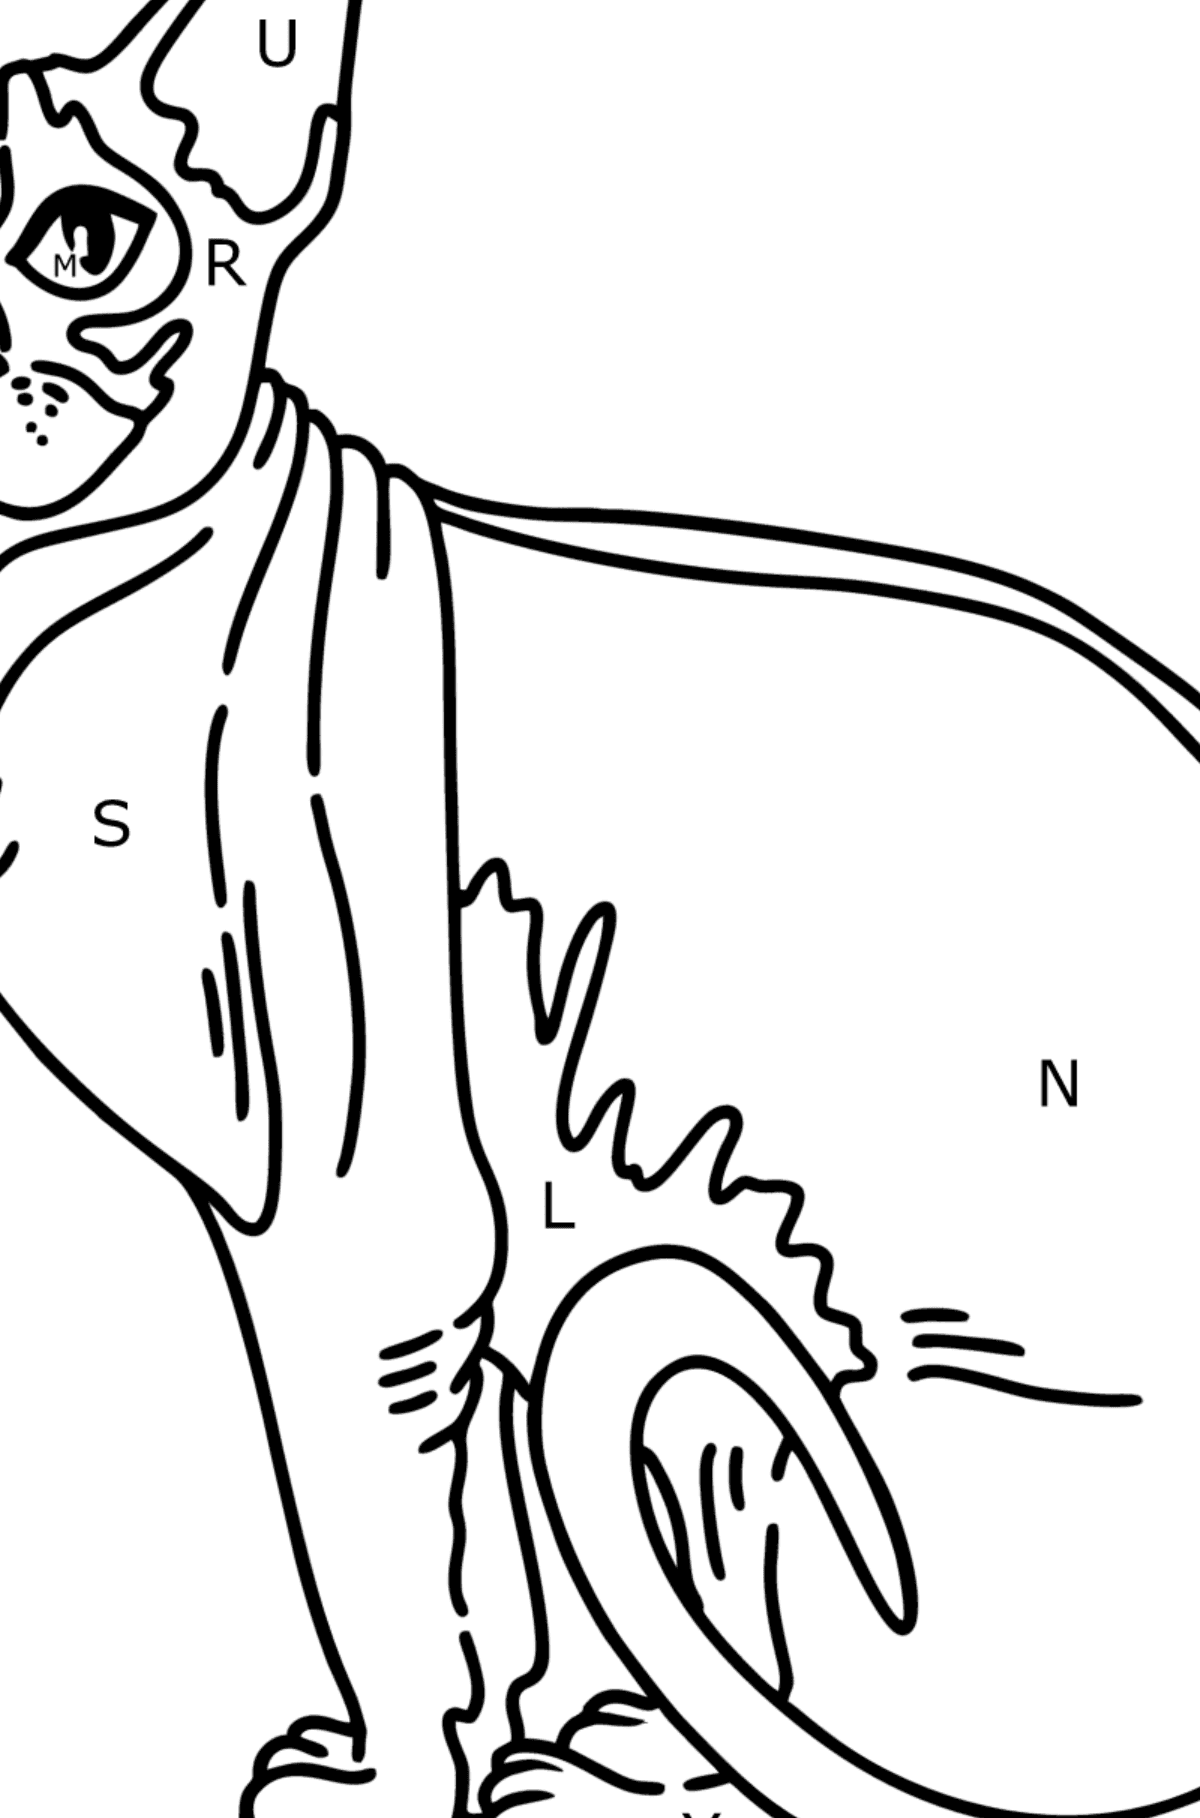 Sphynx Cat coloring page - Coloring by Letters for Kids